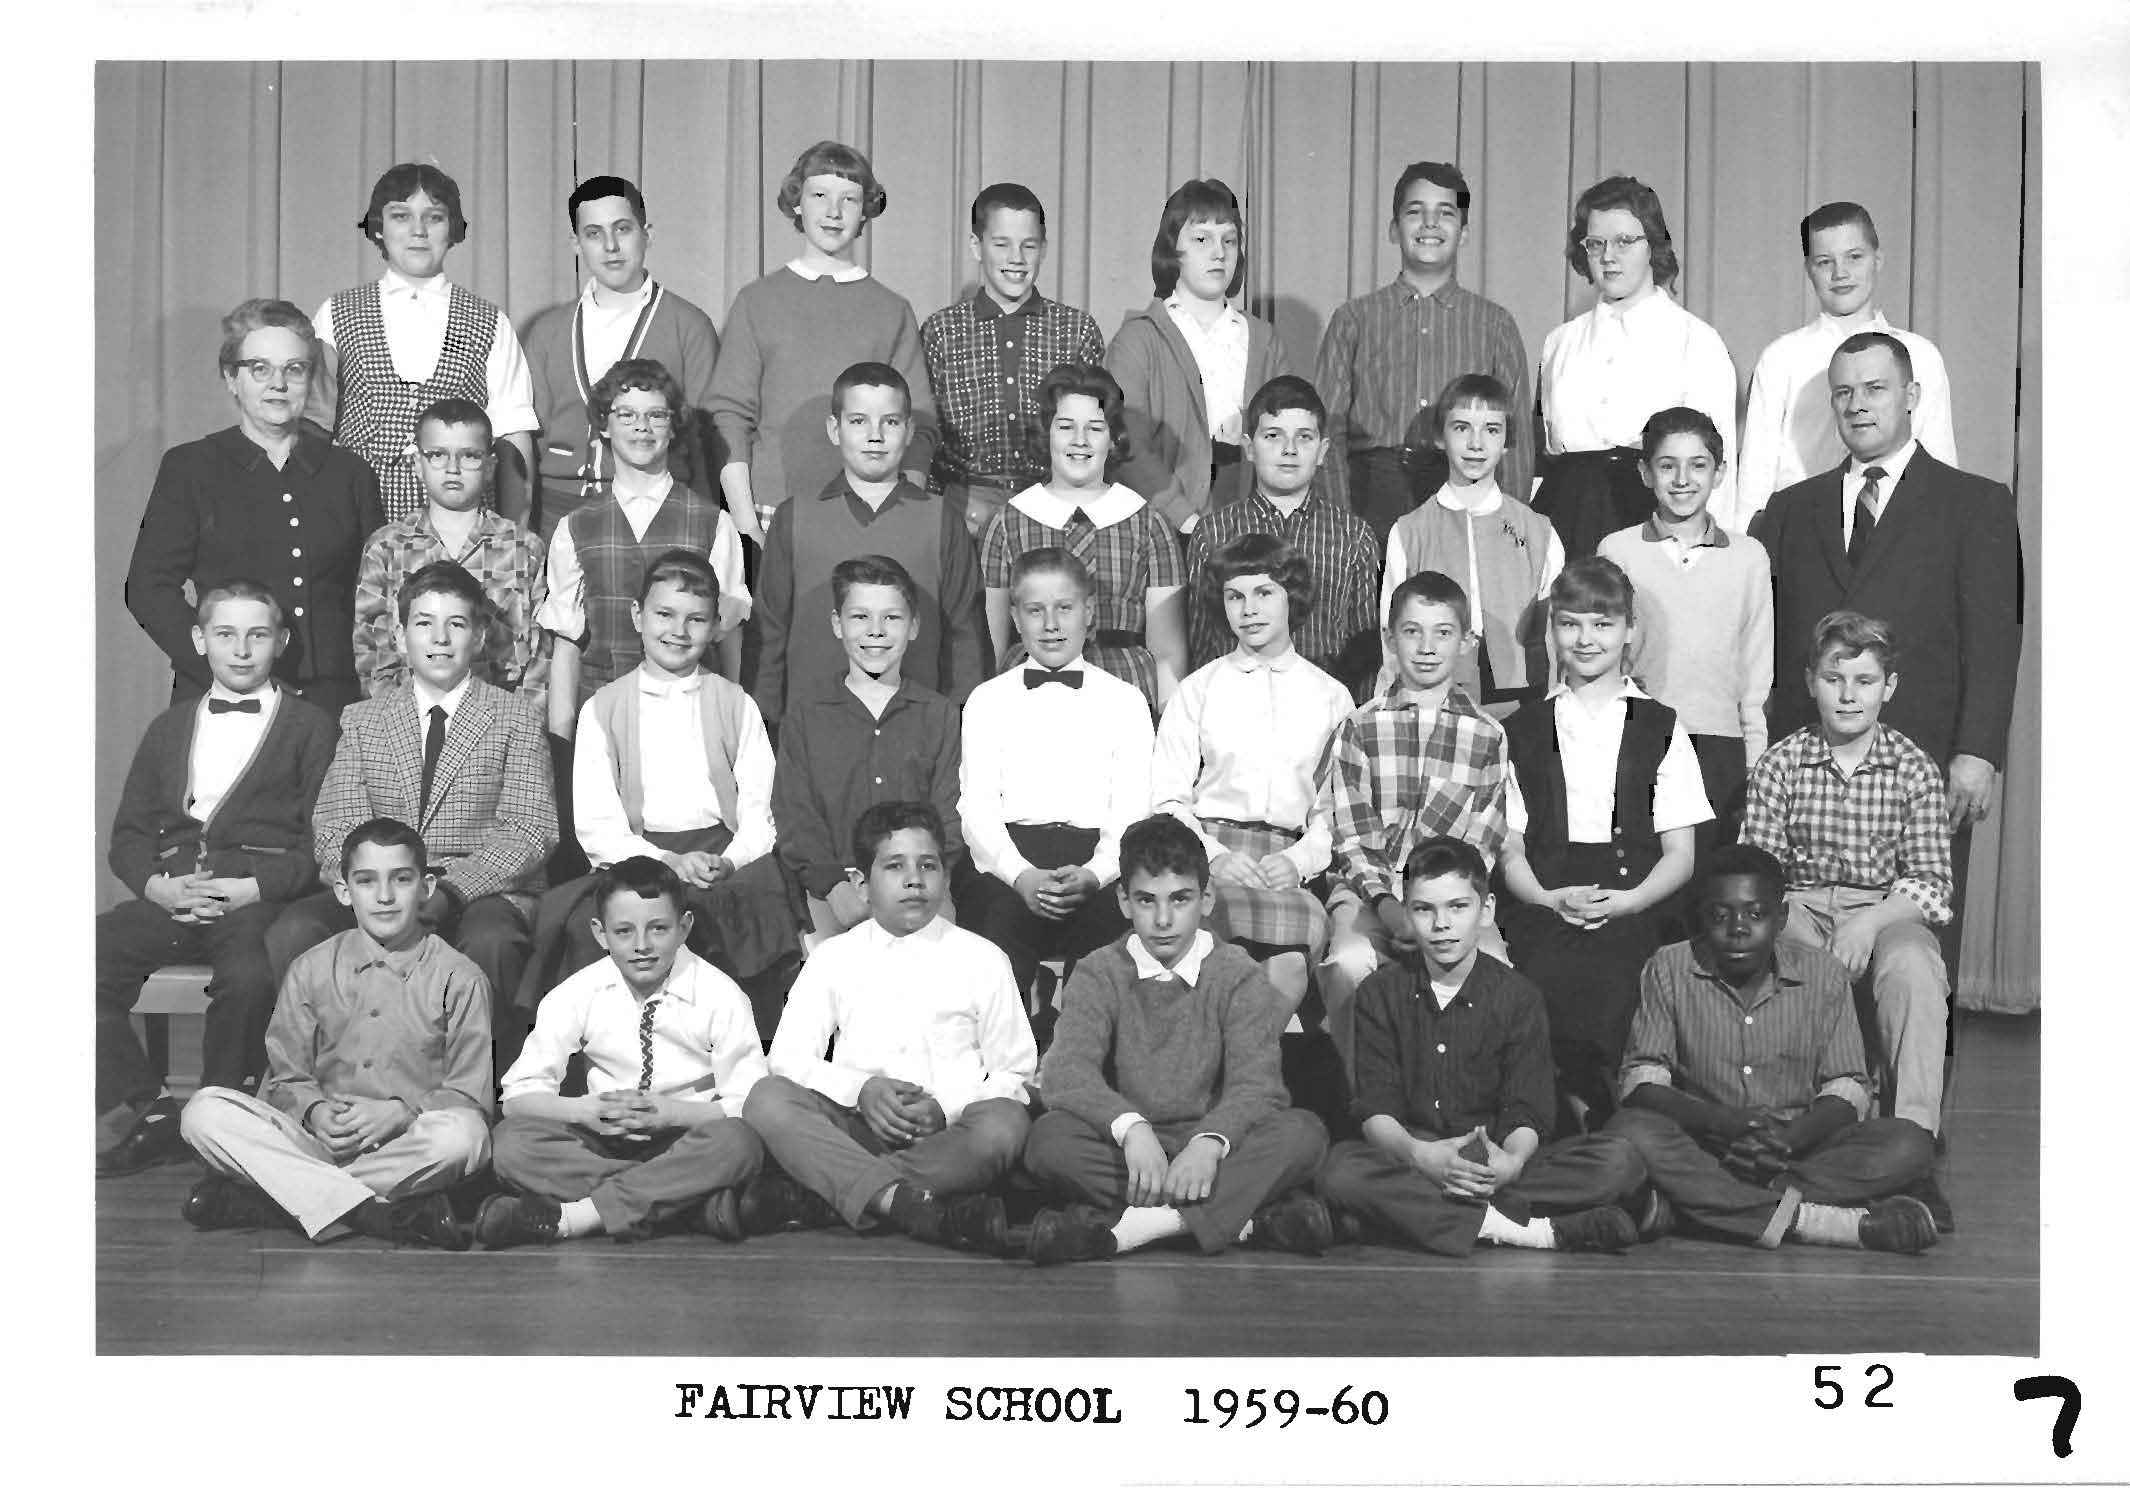 Fairview Elementary School class photo of 7th grade 1959-60, submitted by Dan Wolfe FHS Class of '65